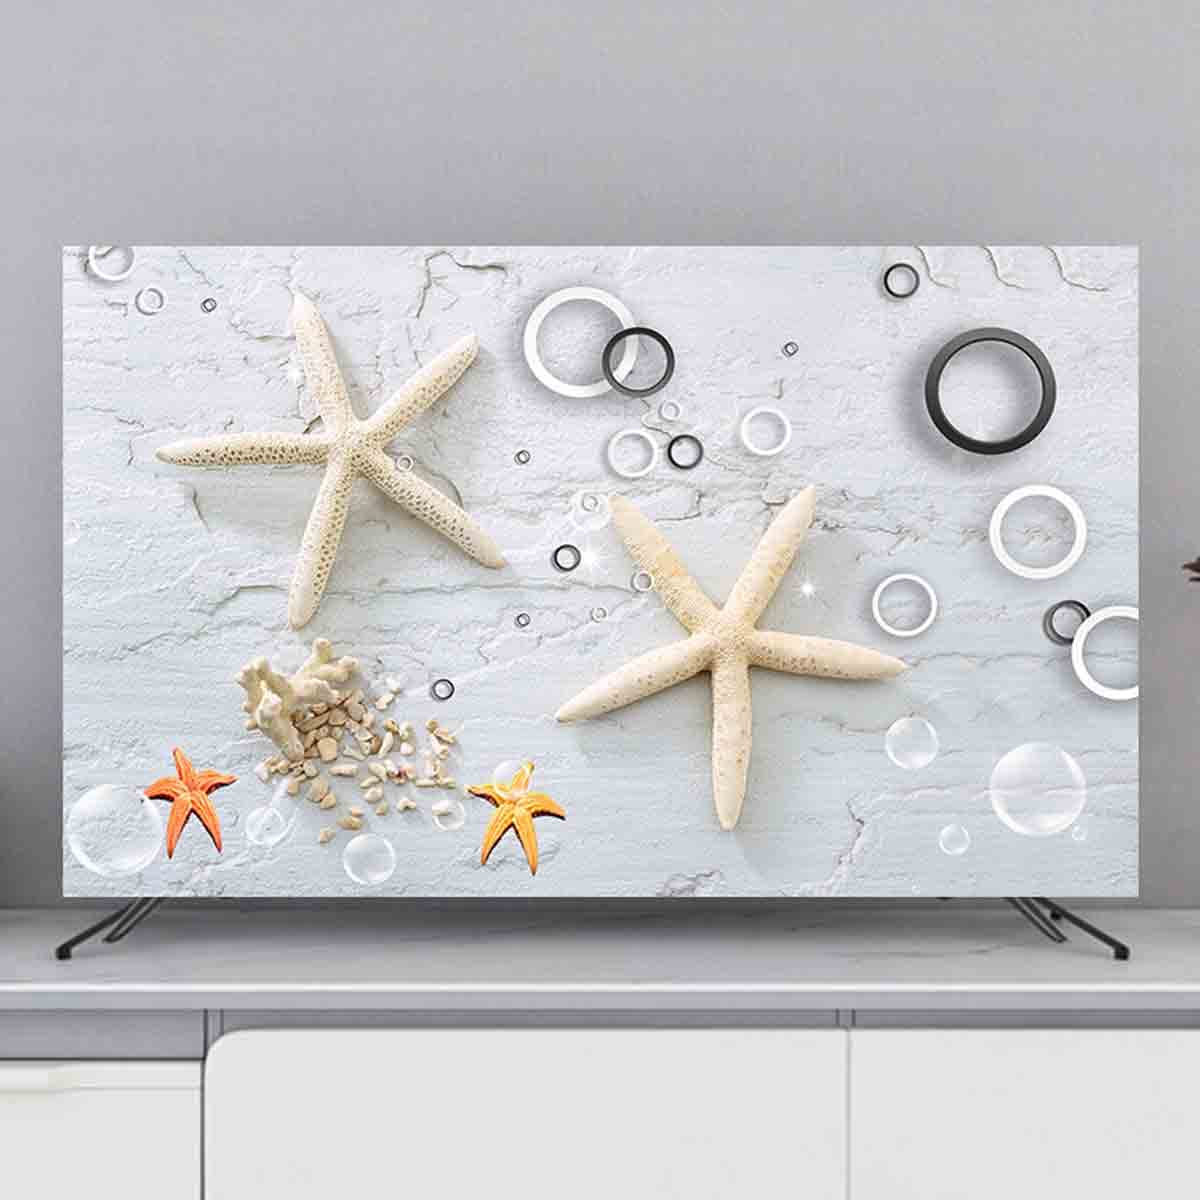 TV Cover Dust Cover, TV Dust Cloth Cover Abstract Landscape Printed Design, for LED, LCD, OLED Smart TV, 32-85 Inch (STYLE-C, 32-80X50CM)